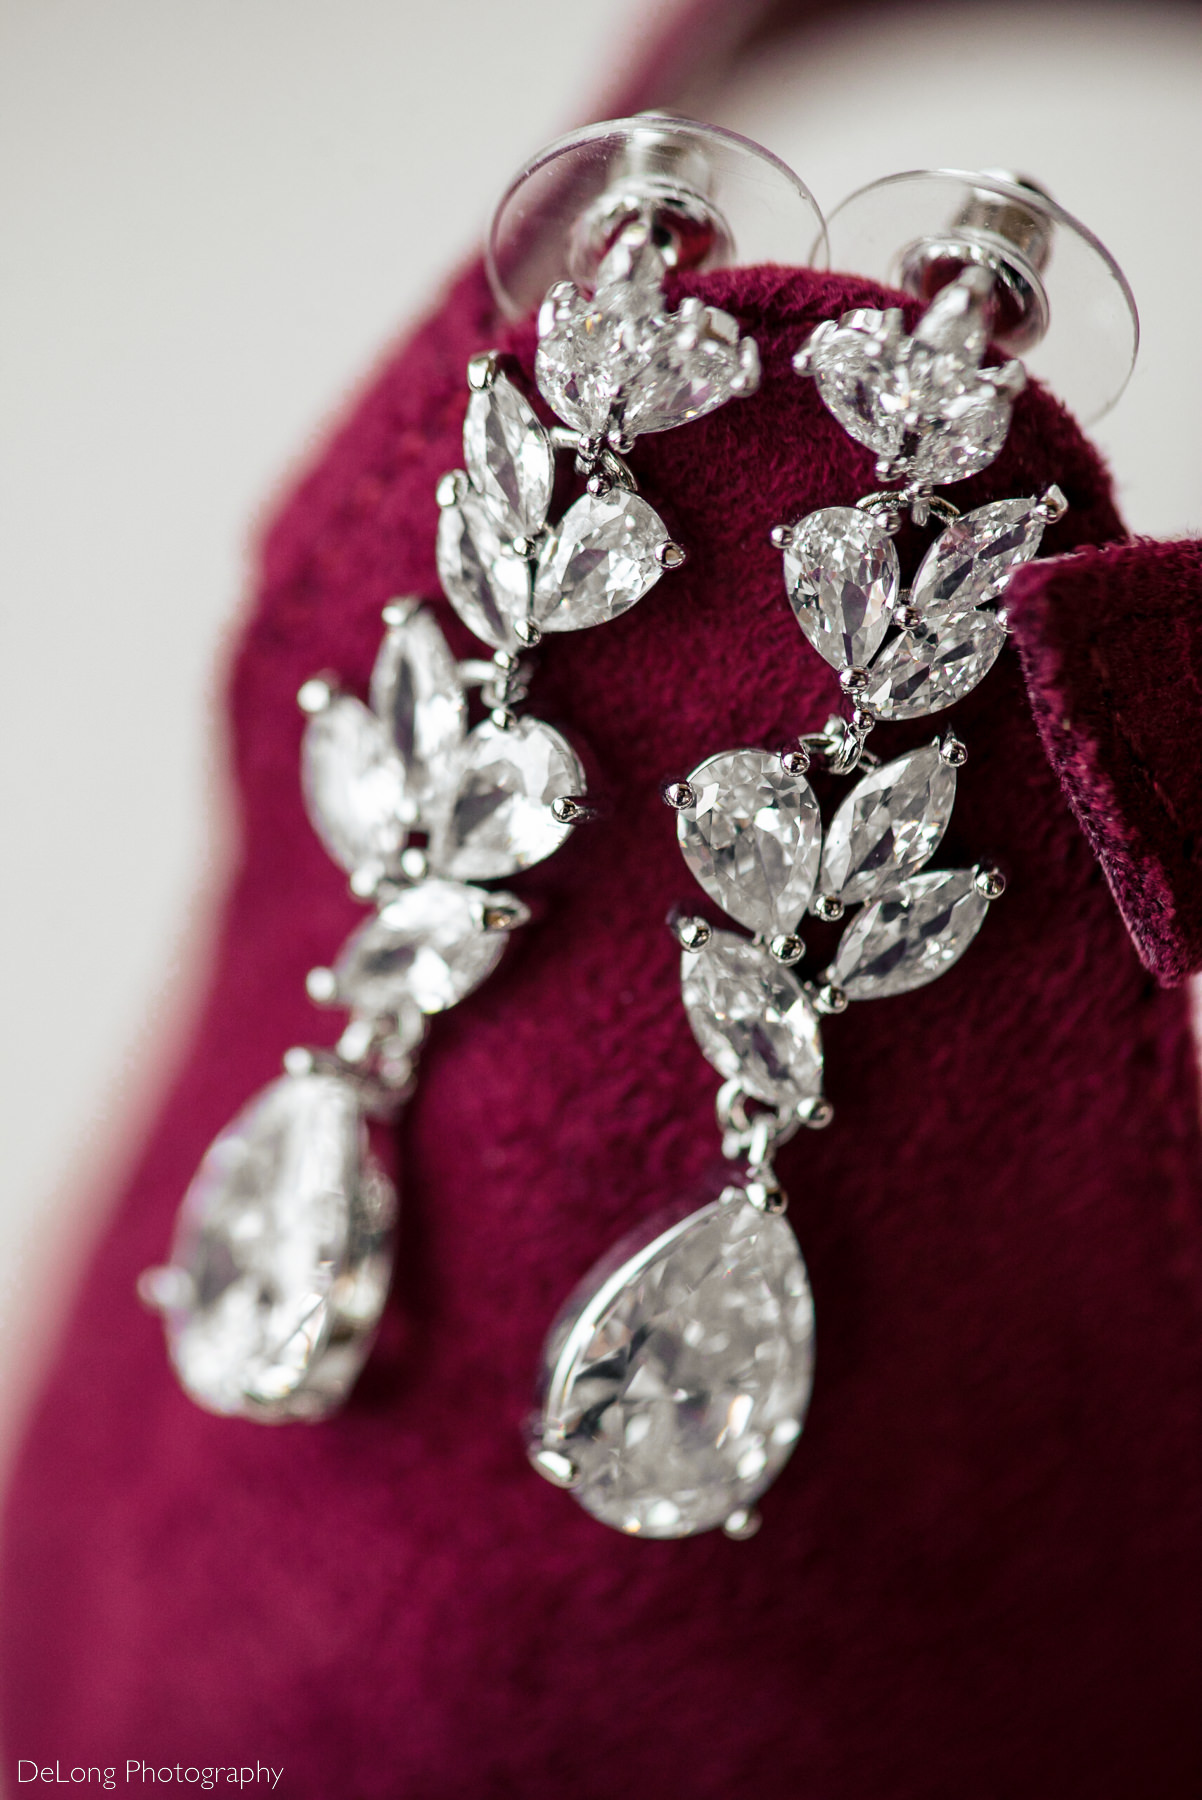 Macro photograph of bridal earrings featuring pear and marquis shaped clear stones at Pine Island Country Club in Charlotte, NC by Charlotte wedding Photographers DeLong Photography